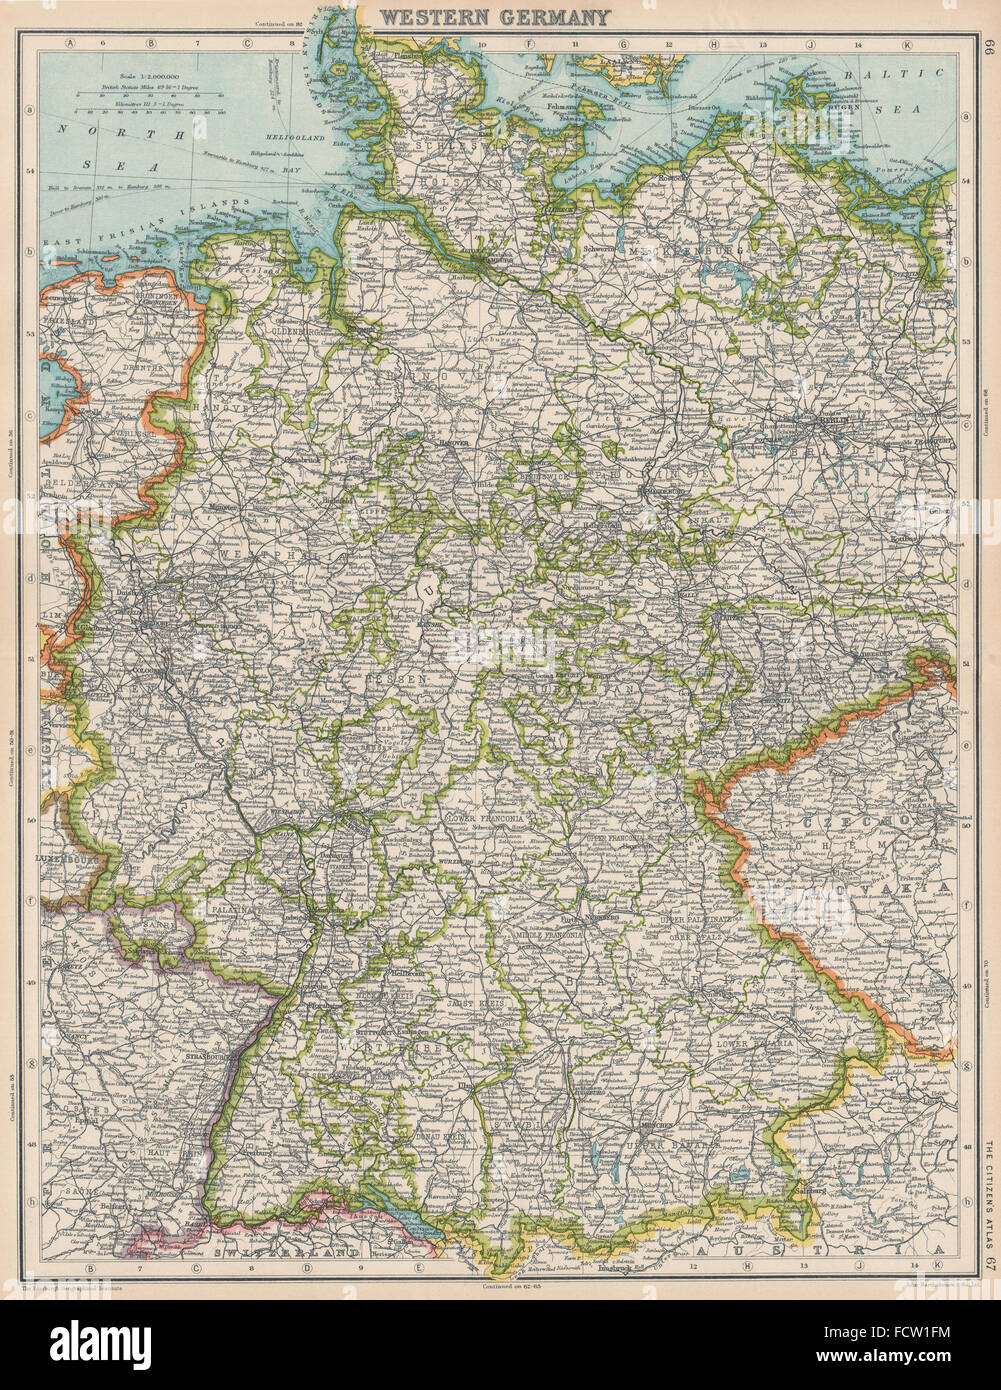 WESTERN GERMANY: Shows Saarbeckengebiet under League of Nations mandate 1924 map Stock Photo